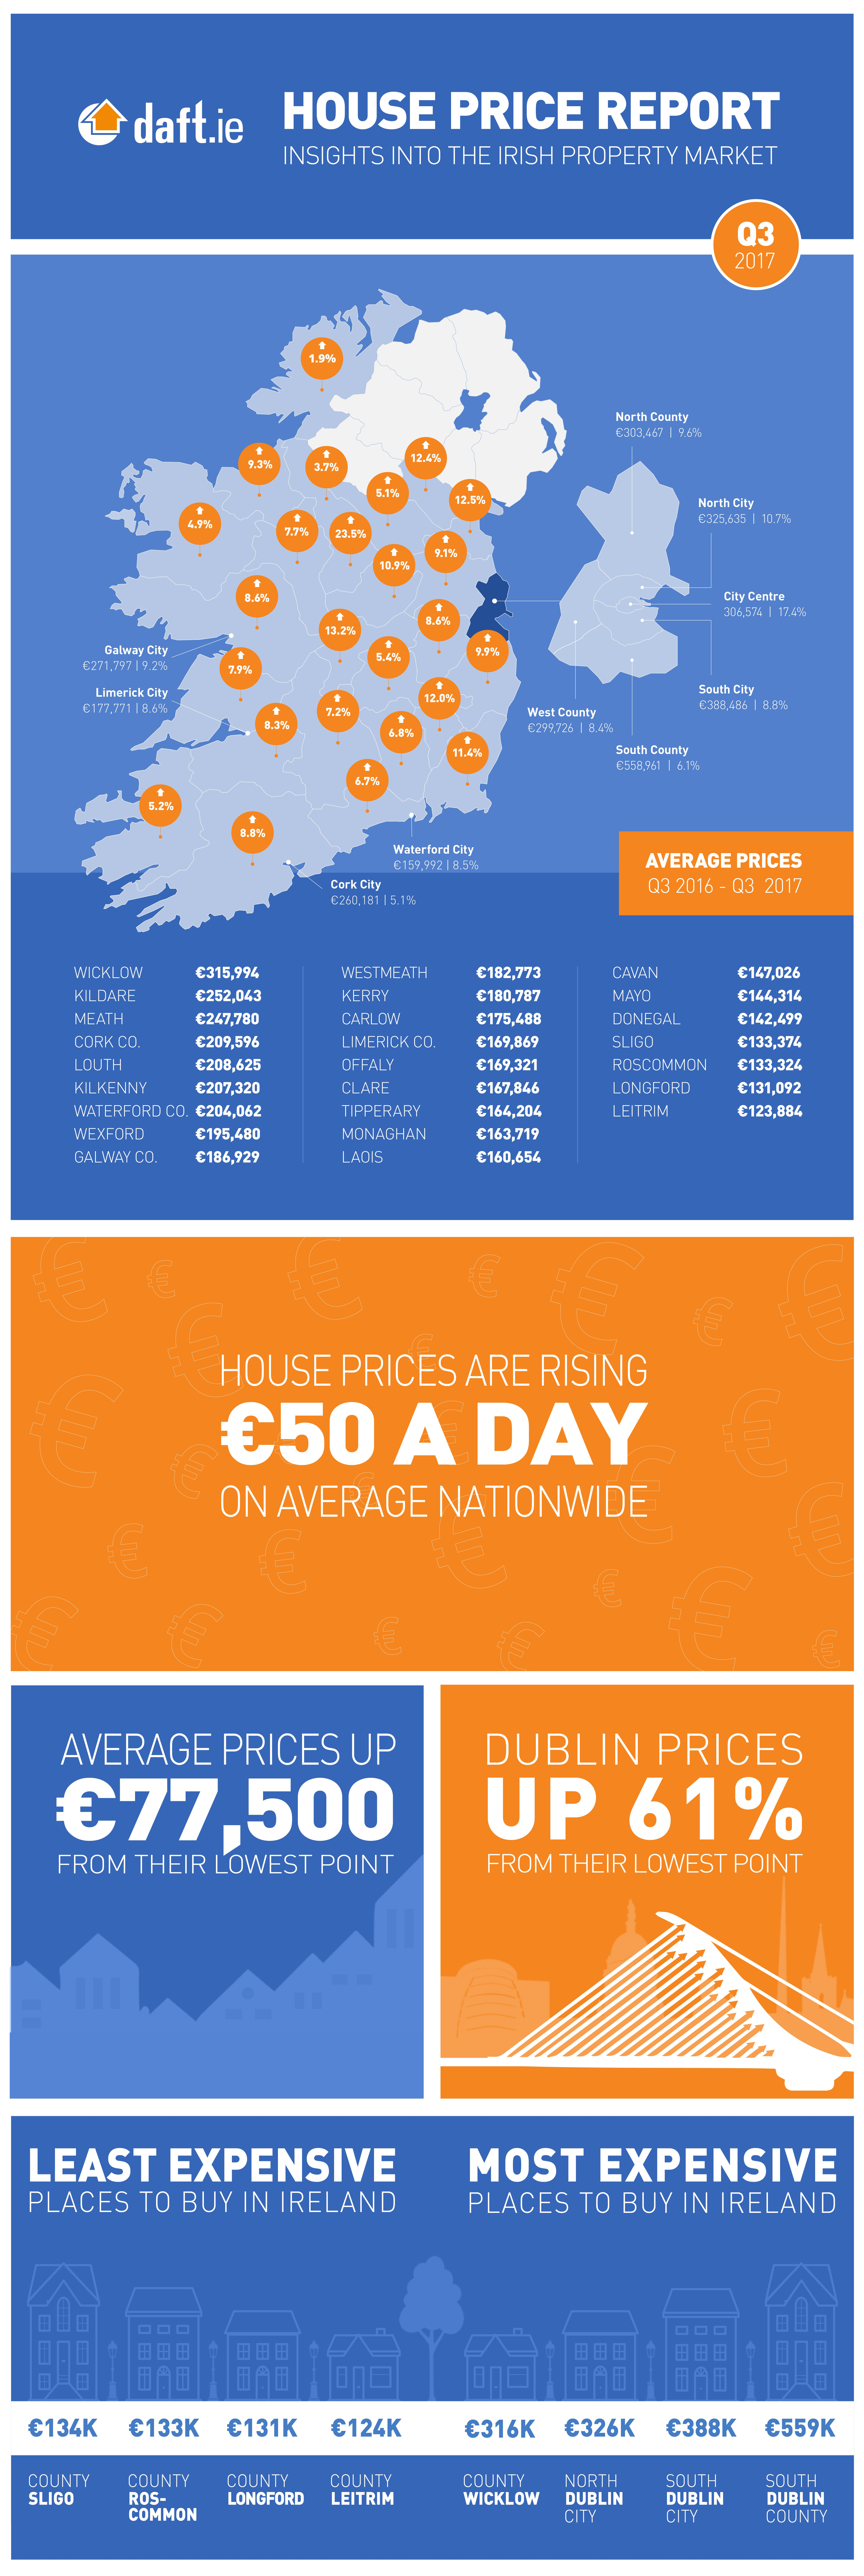 Daft.ie House Price Report: Q3 2017 Infographic